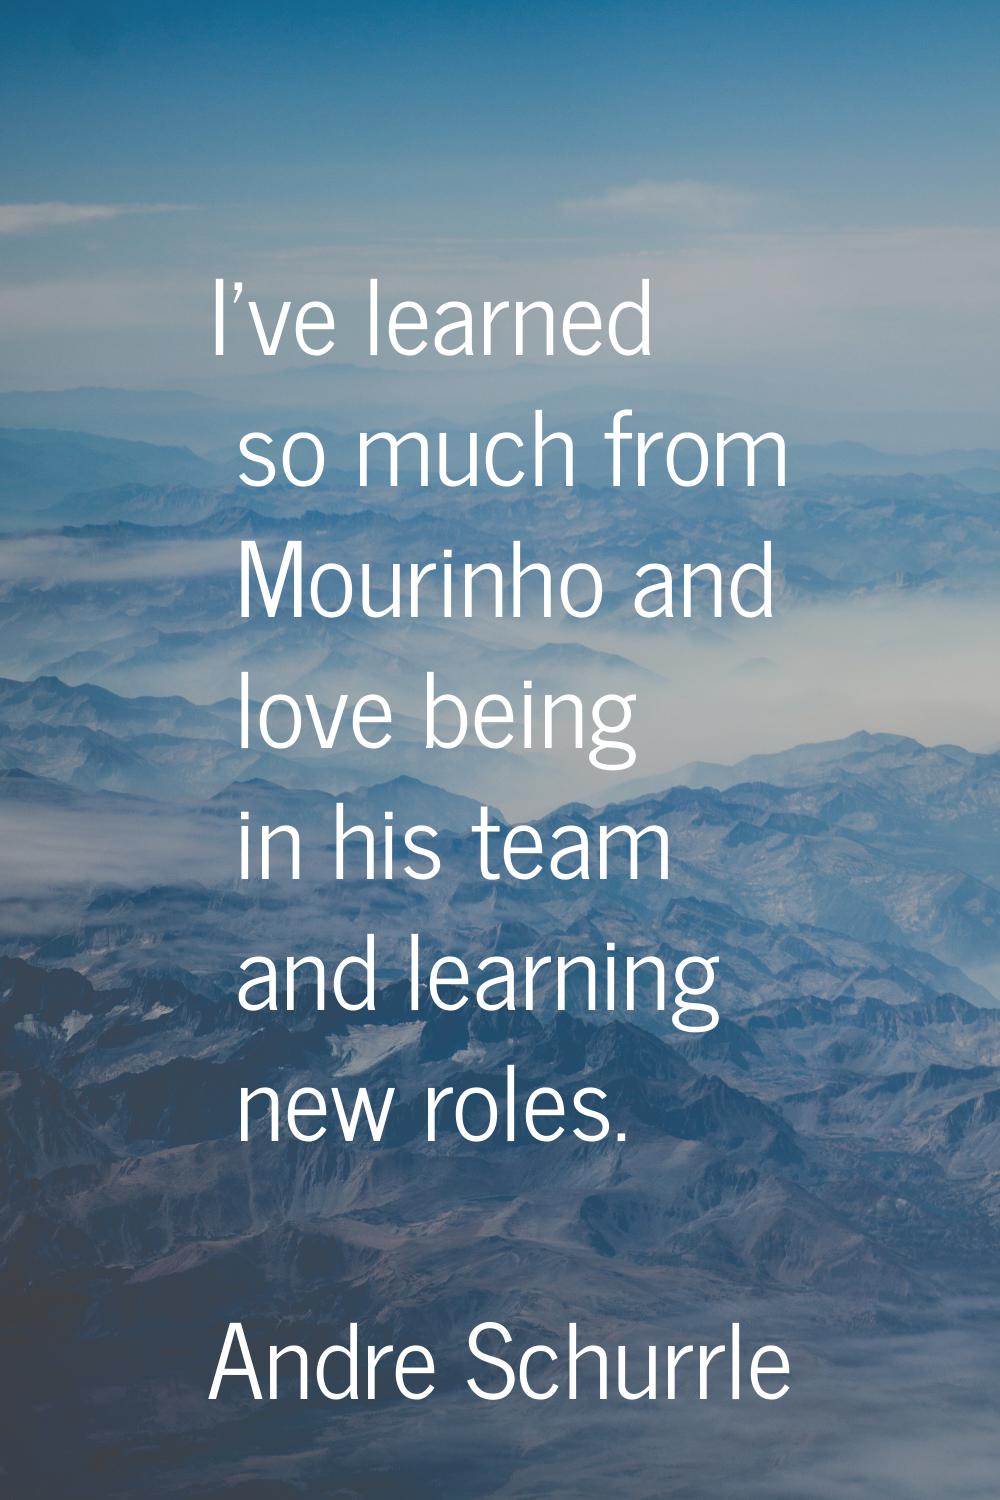 I've learned so much from Mourinho and love being in his team and learning new roles.